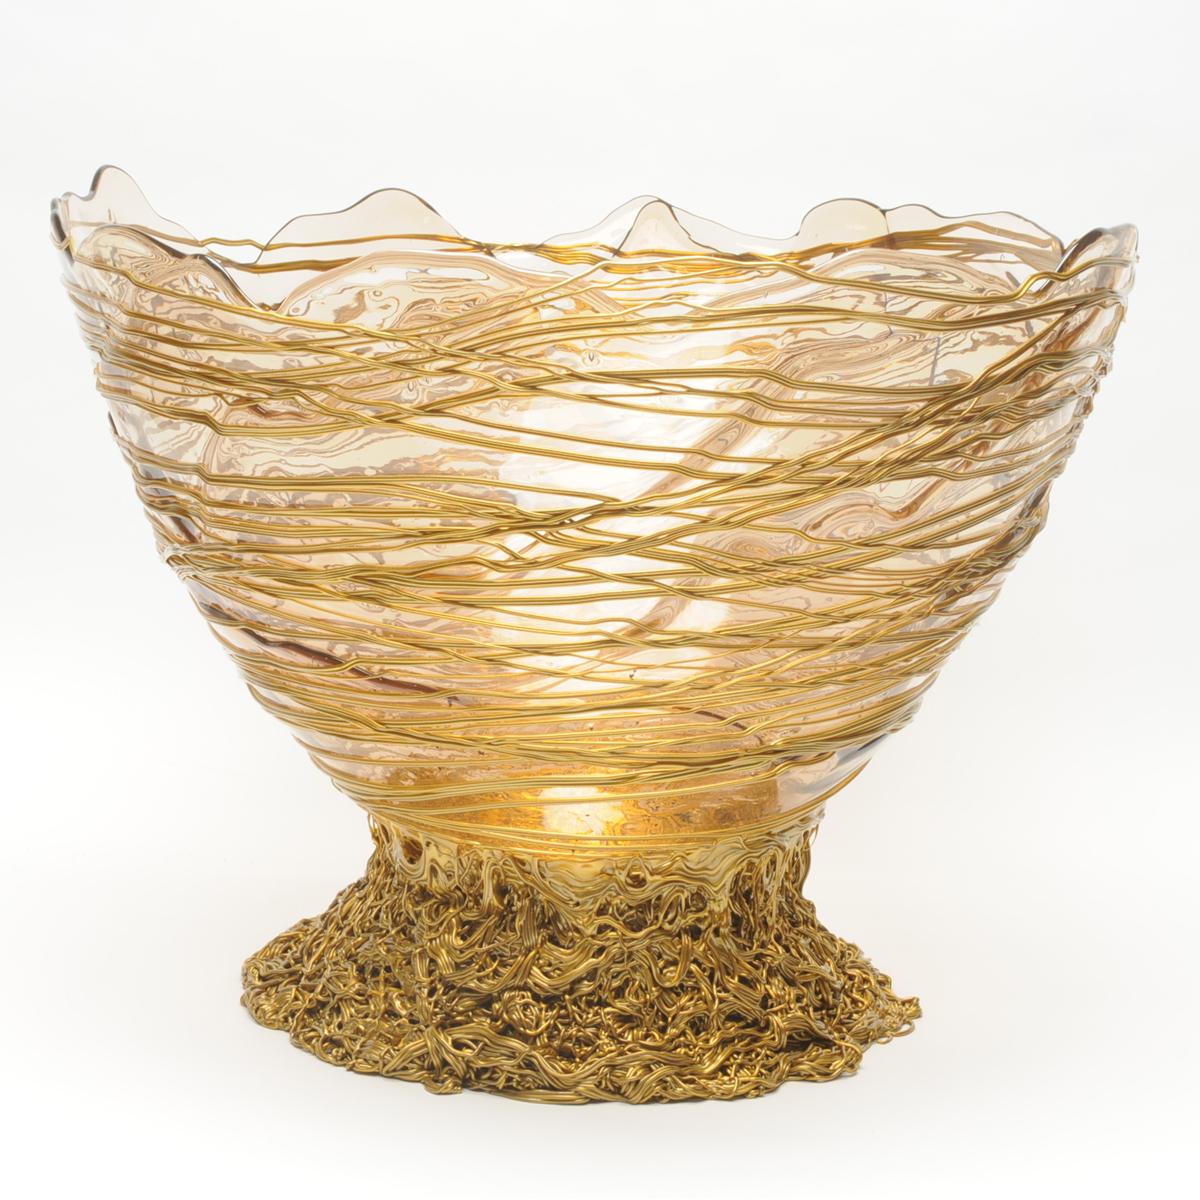 Ogiva basket - clear, gold

Basket in soft resin designed by Gaetano Pesce in 1995 for Fish Design collection.

Additional Information:
Material: Soft resin
Colours: Clear, gold
Dimensions: ø 55cm x H 42cm
Available in other size options: M